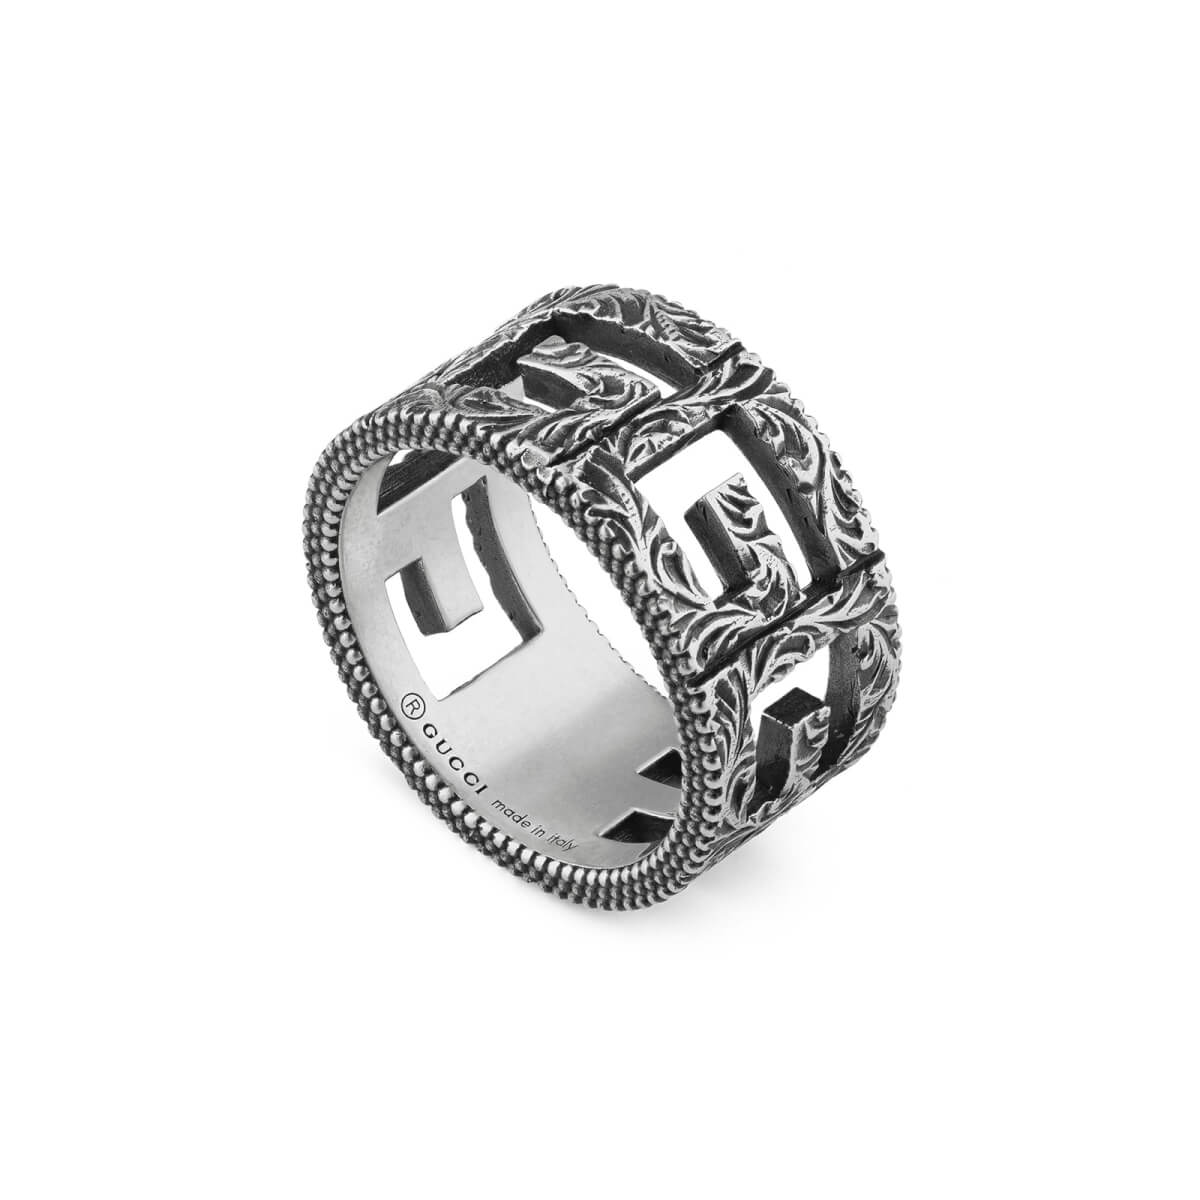 Ring With Square G Motif In Silver - Ring Size L